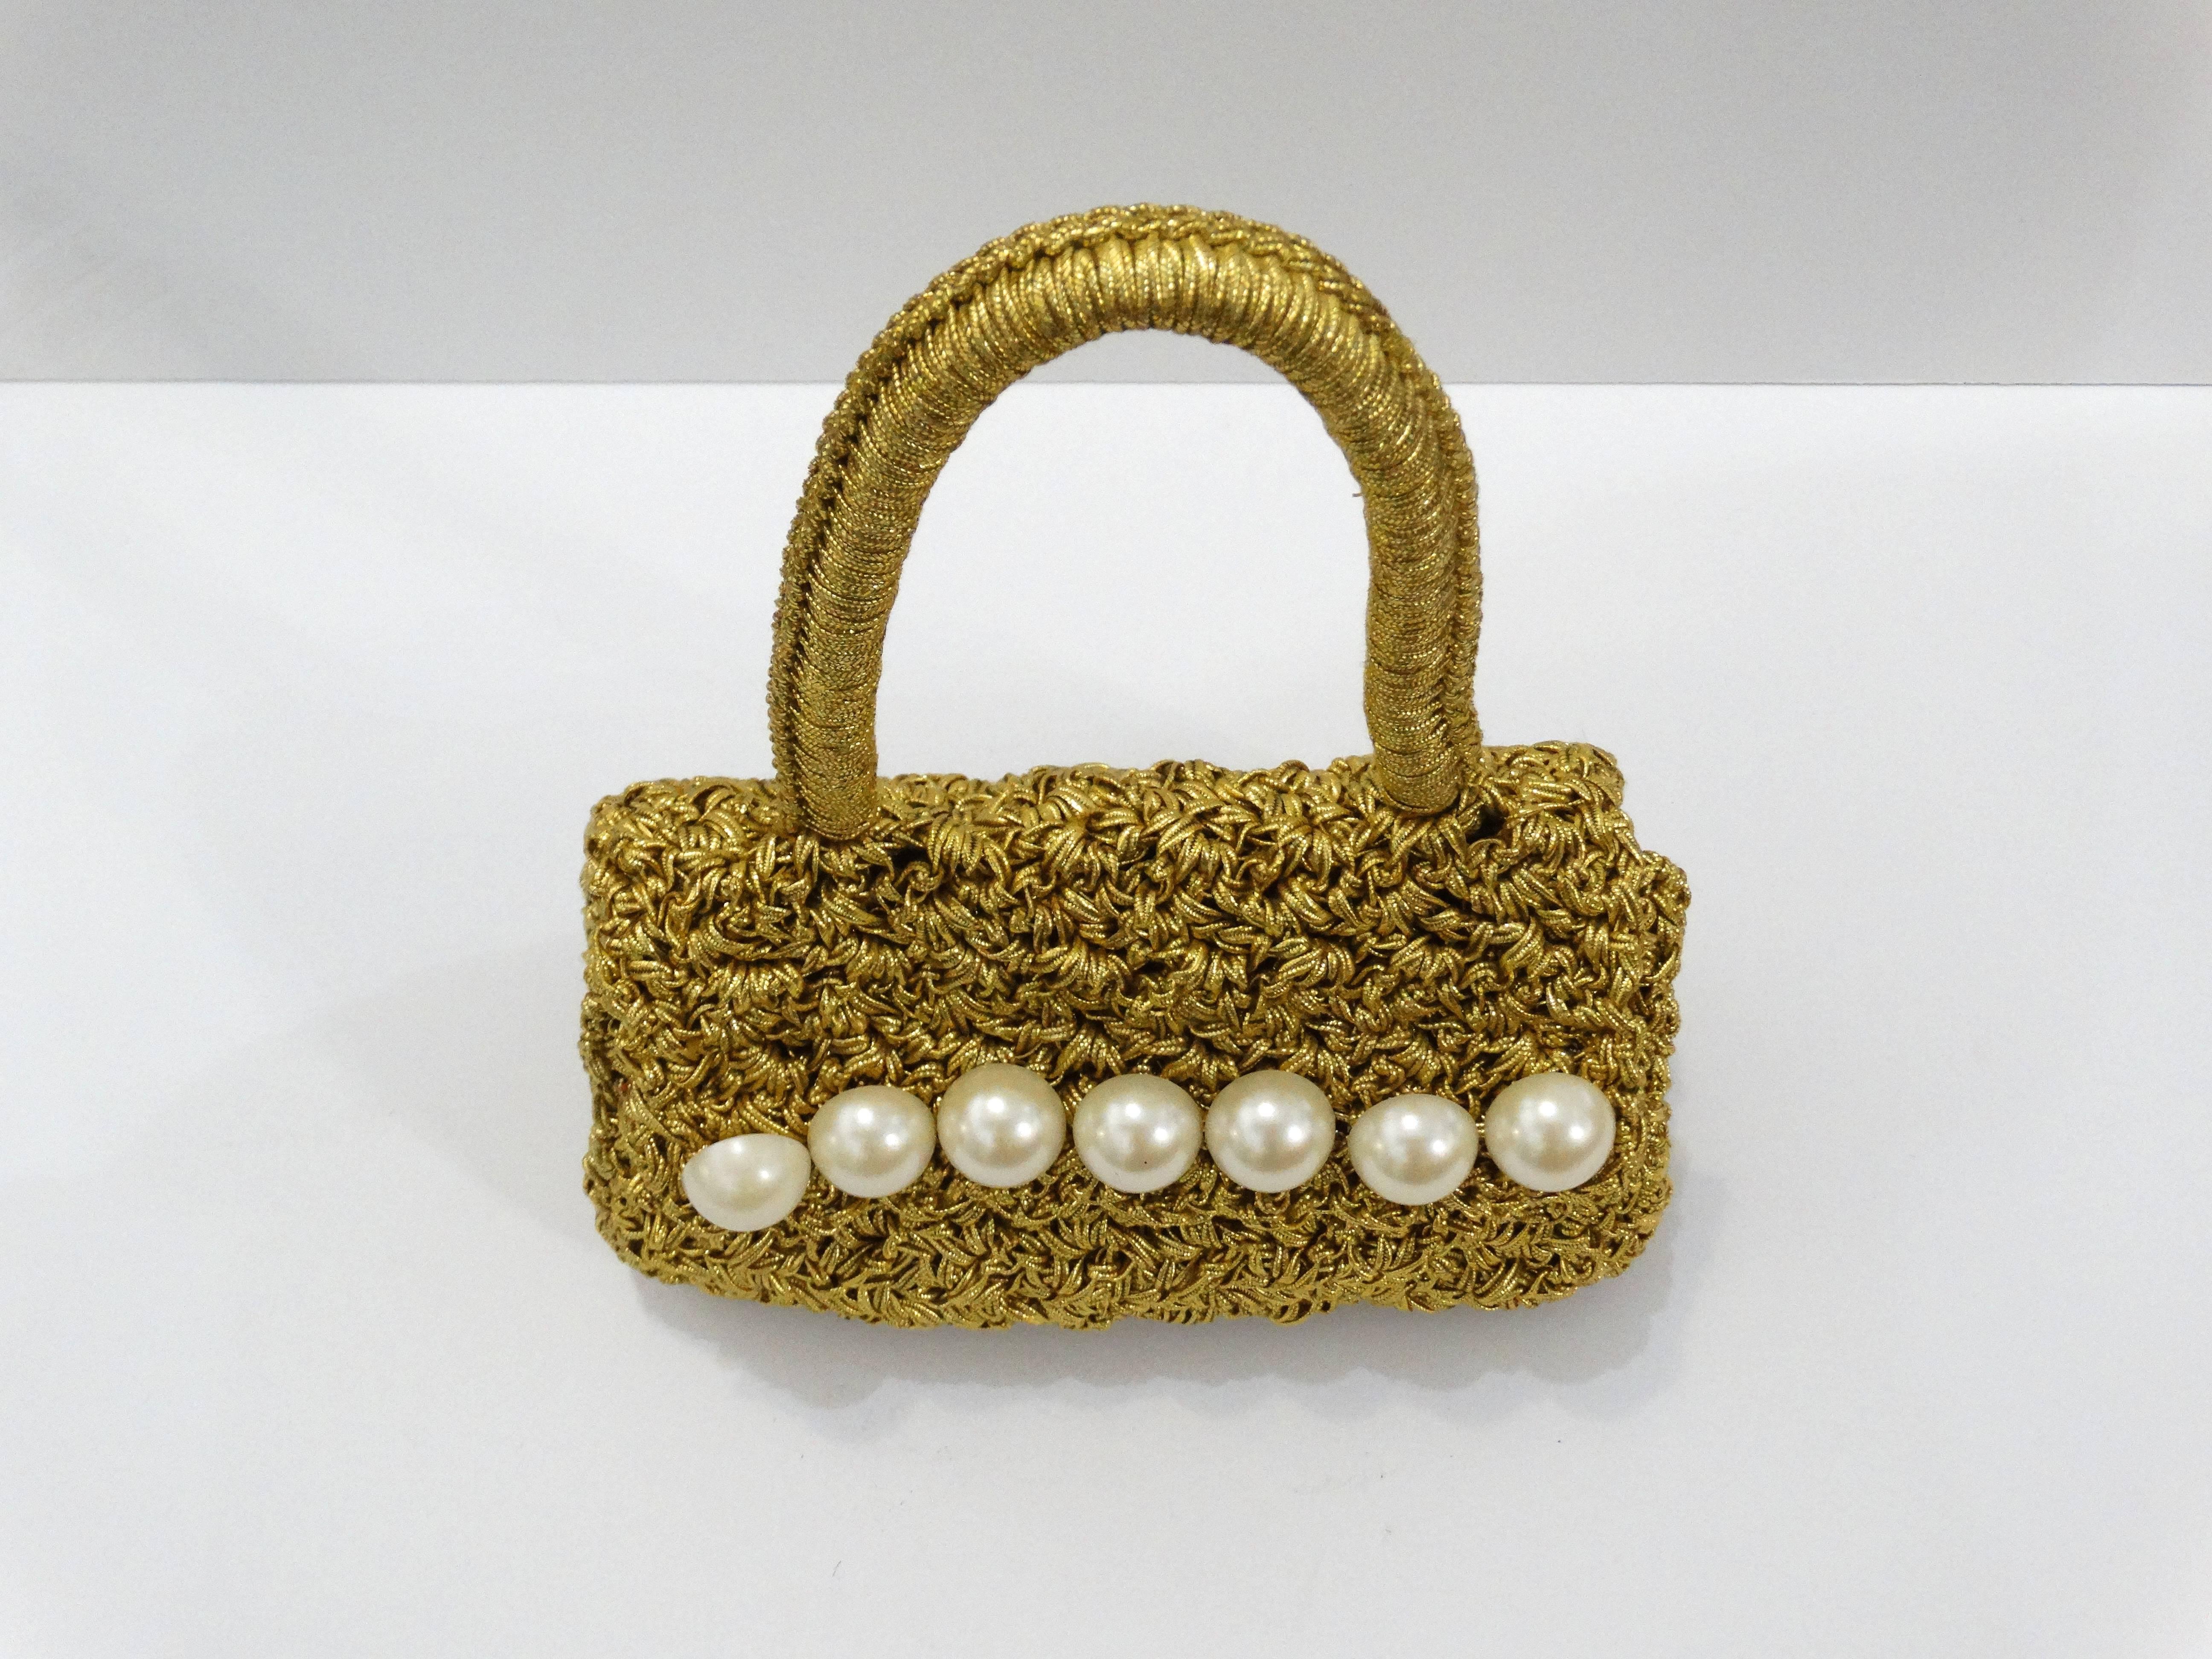 Gorgeous Carrie Forbes woven mini bag! Brilliant gold woven material accented with large faux pearls. Magnetic snap closures. Unlined interior. Will fit a large smartphone.

Measurements:

7